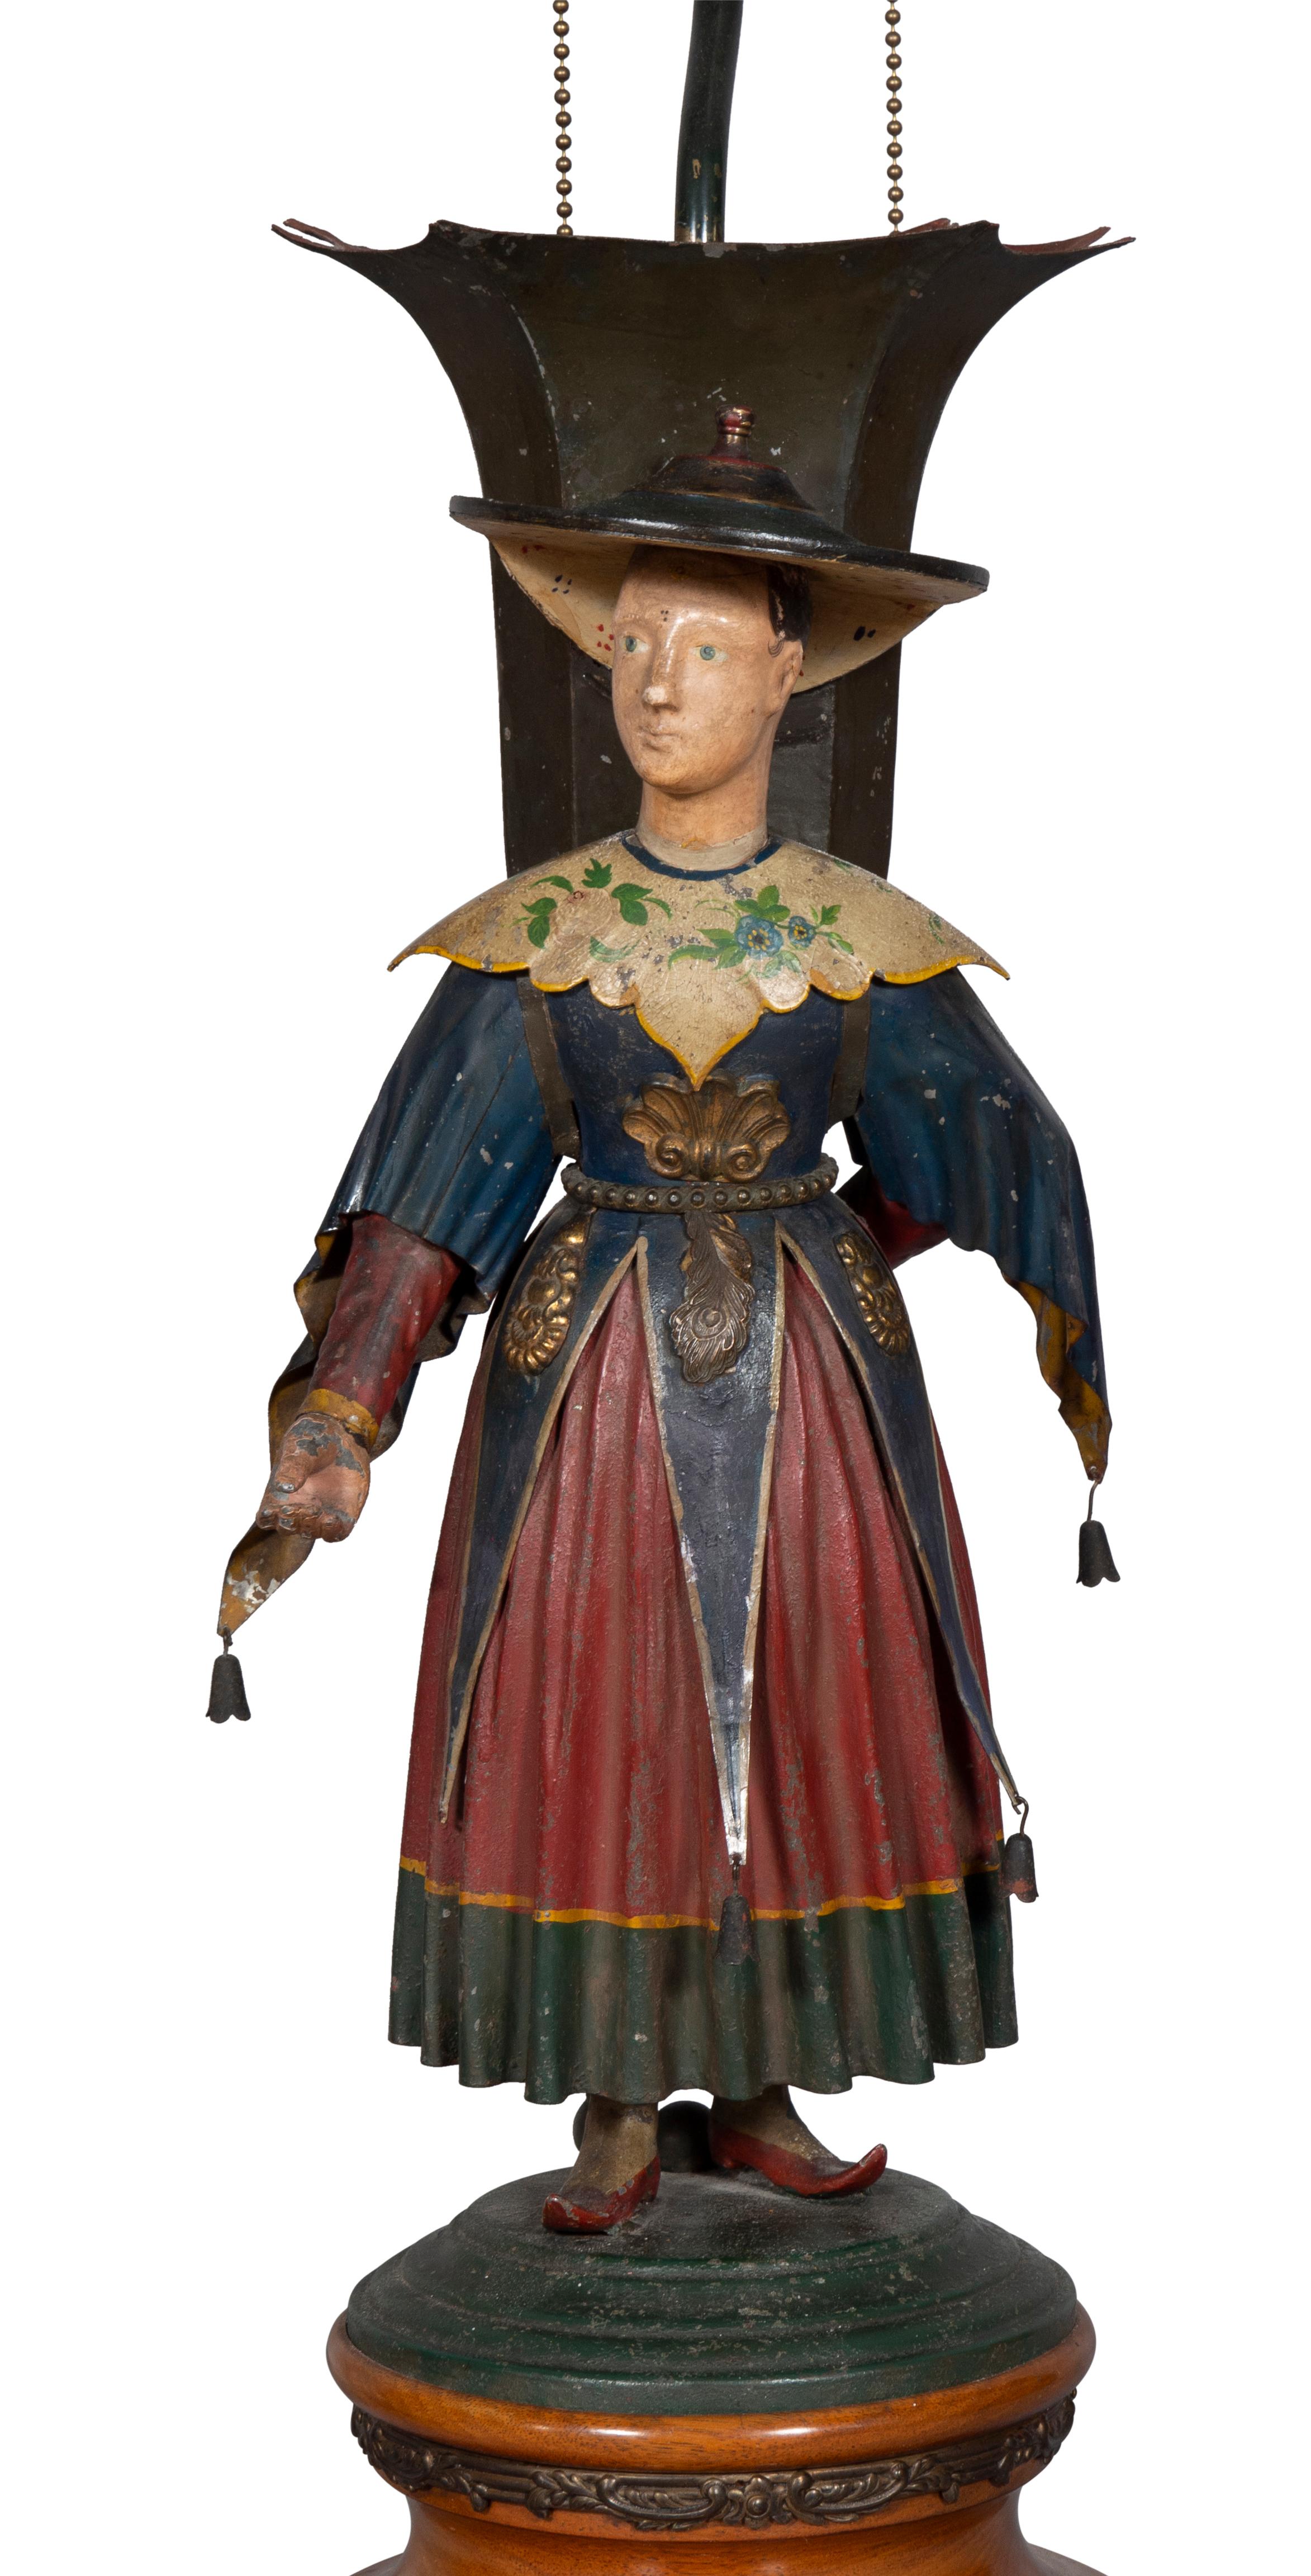 Now lamps with wood bases, each depicting an Asian figure in painted costume dress.